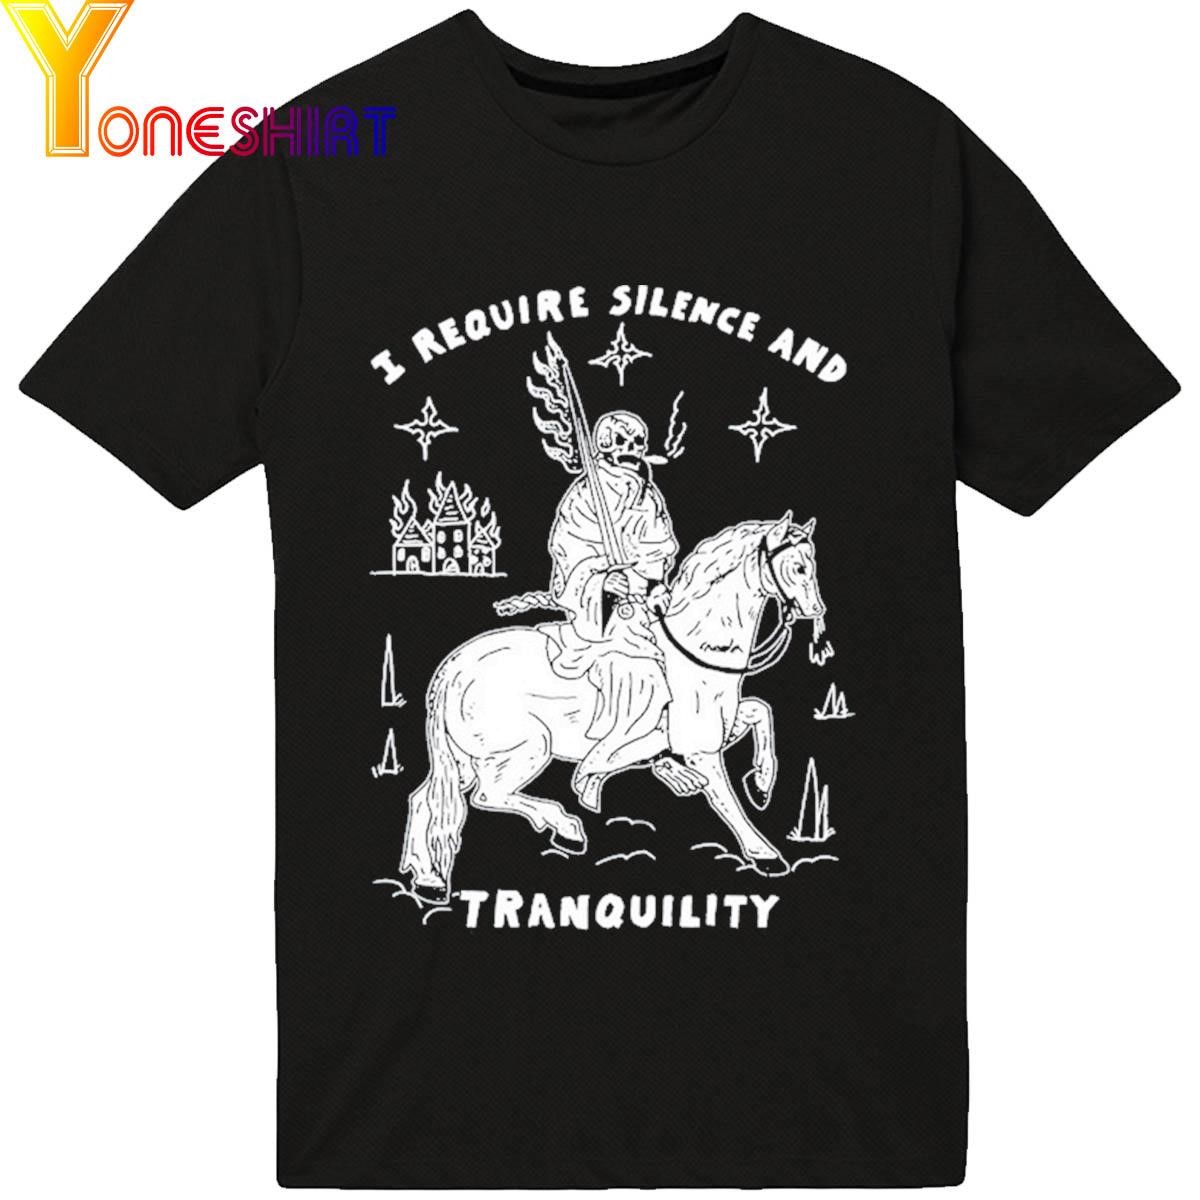 I Require Silence And Tranquility shirt